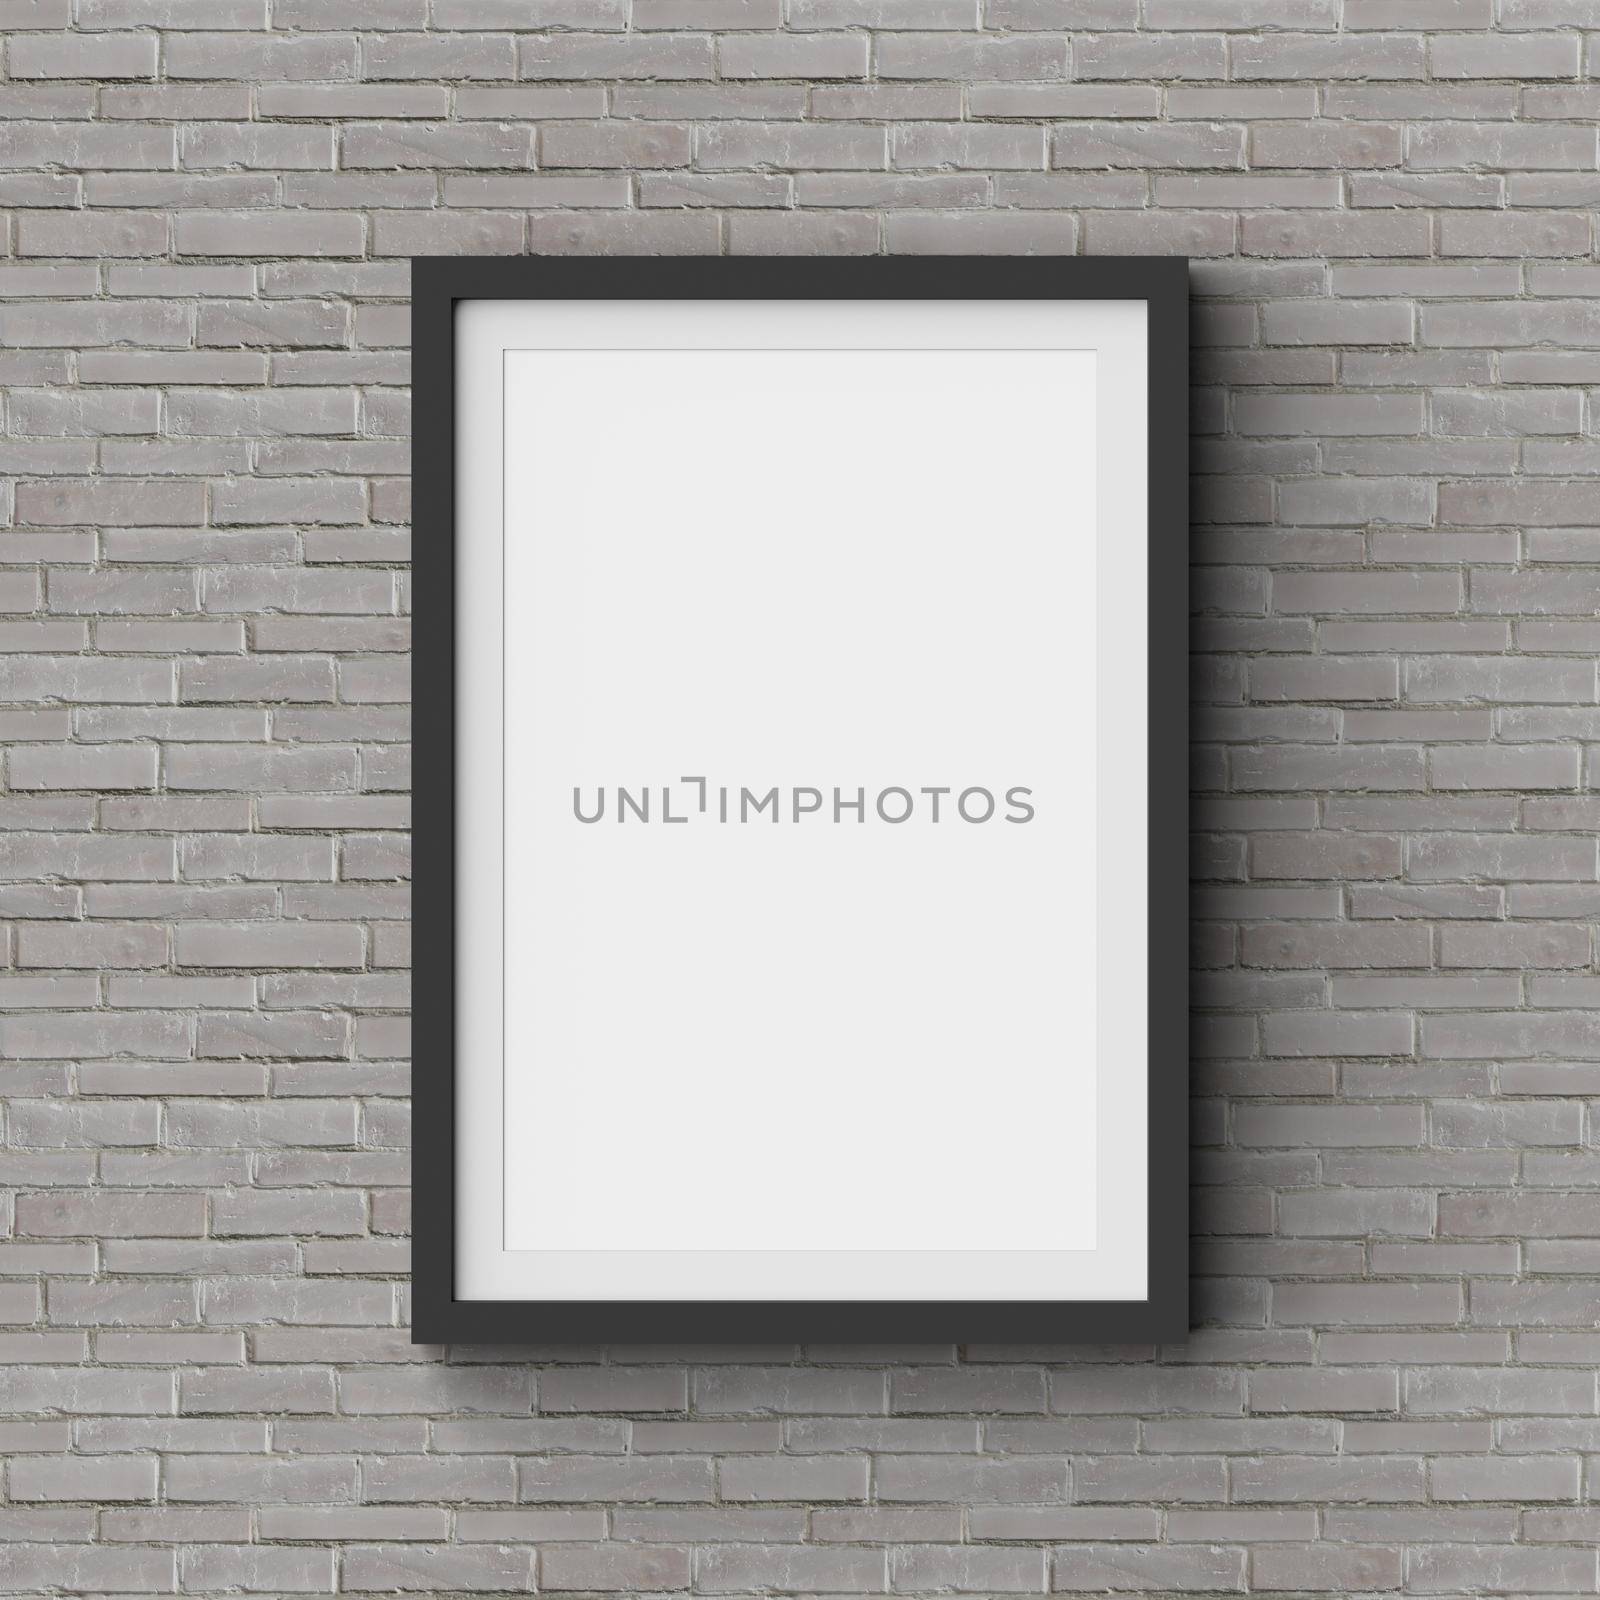 Blank photo frame mockup on a brick wall for advertisement, 3d illustration